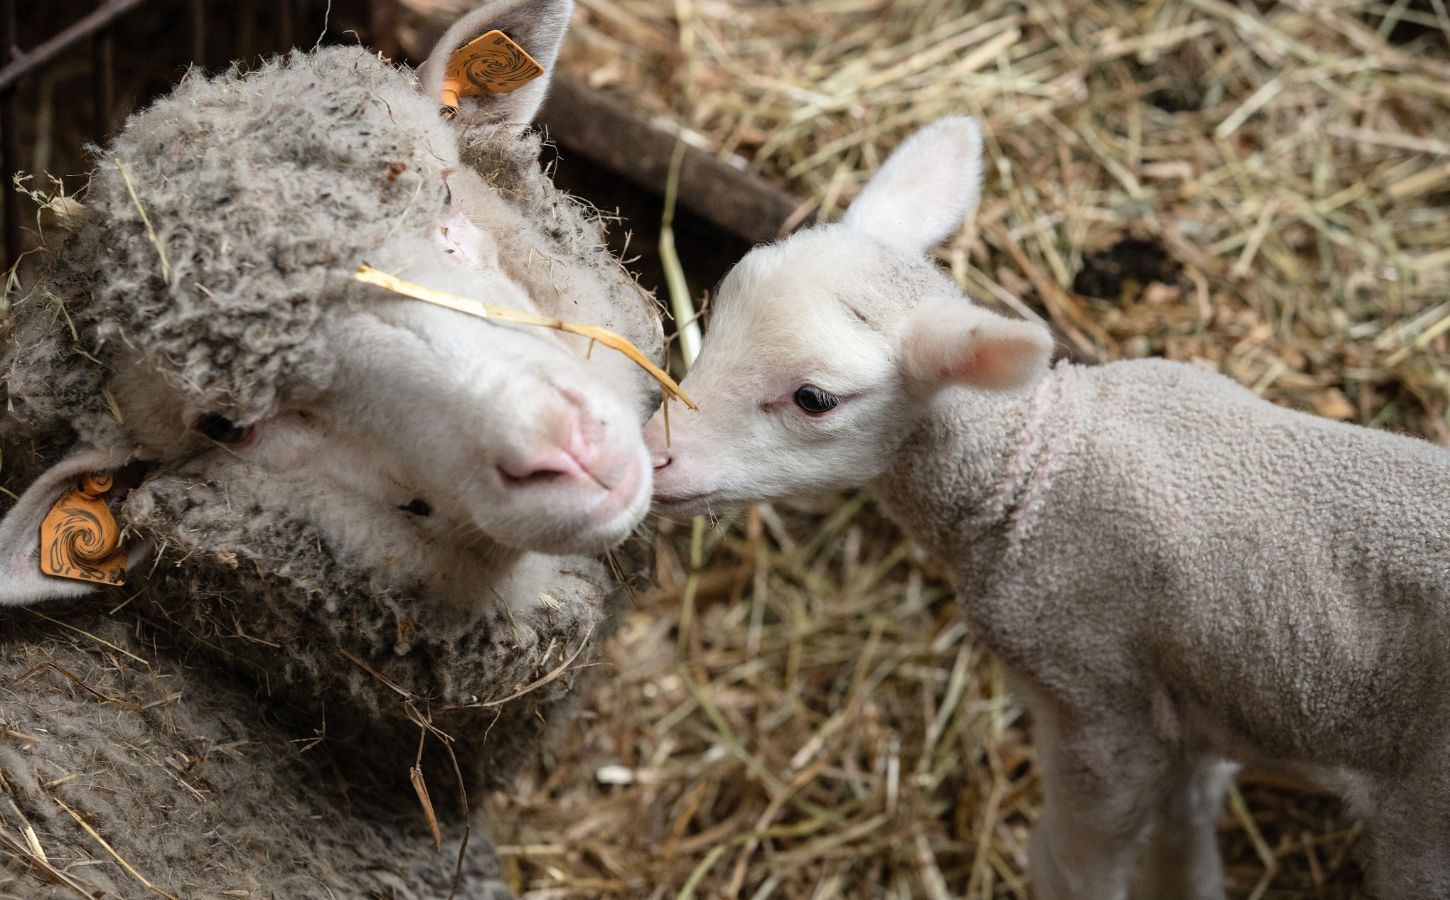 A lamb and their mom on a sheep / wool farm